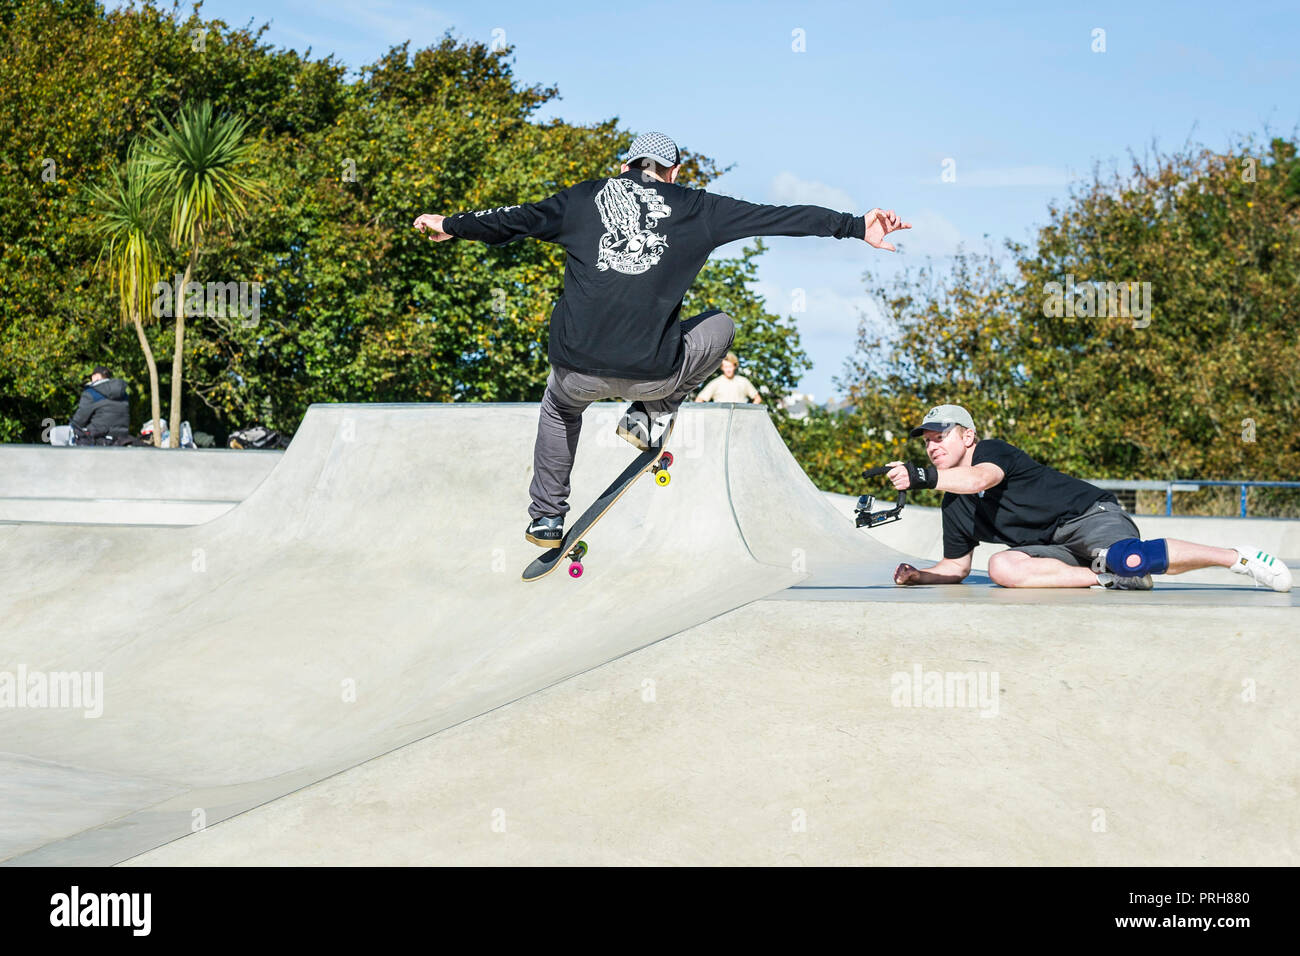 A skateboarder being filmed performing an aerial trick at Concrete Waves Skateboard Park in Newquay in Cornwall. Stock Photo